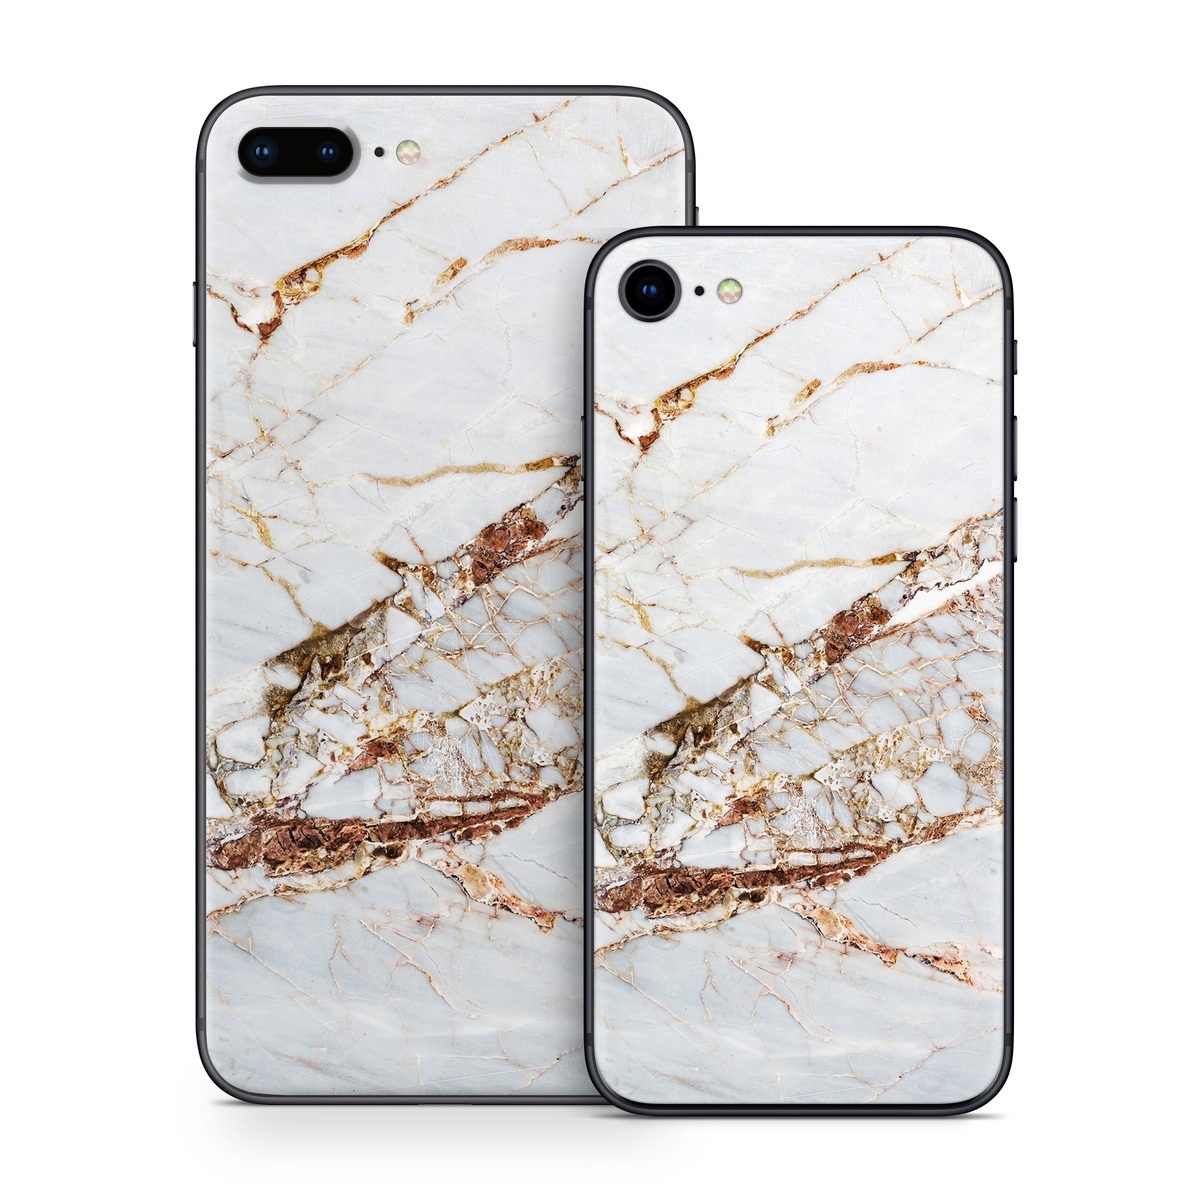 iPhone 8 Skin design of White, Branch, Twig, Beige, Marble, Plant, Tile with white, gray, yellow colors